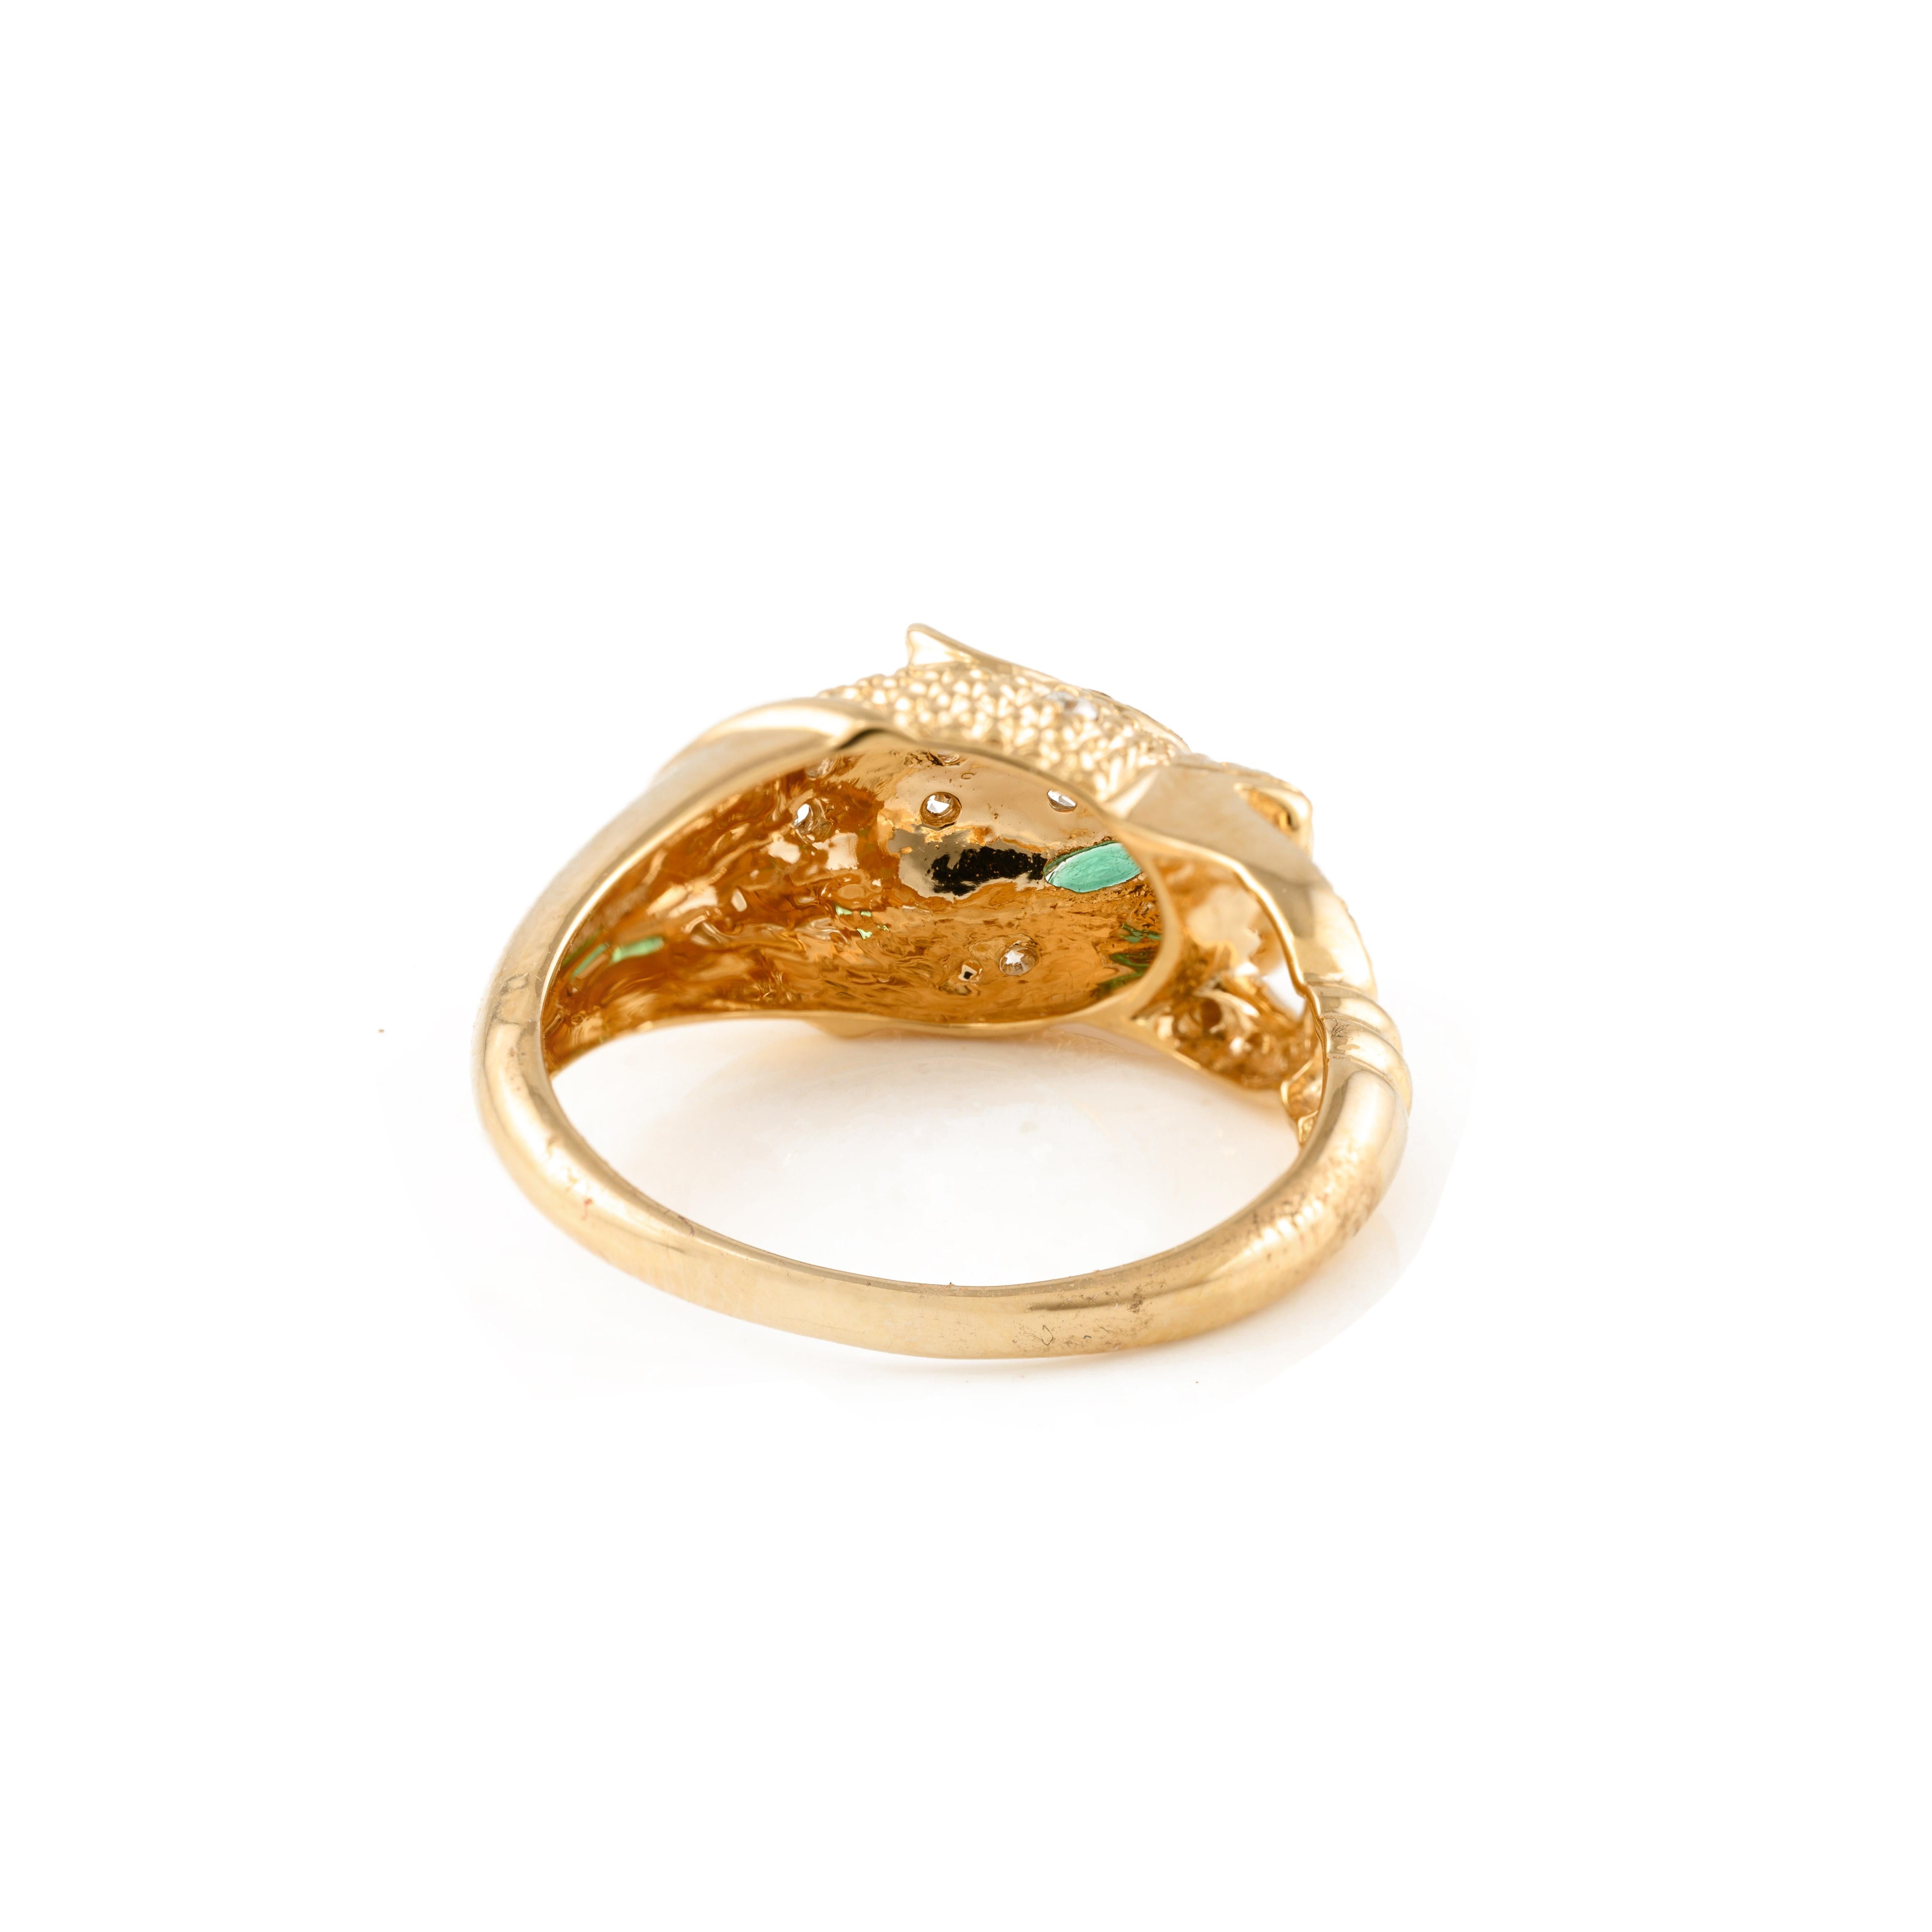 For Sale:  Vintage Panther Head Cocktail Ring Crafted in 18k Solid Yellow Gold 7